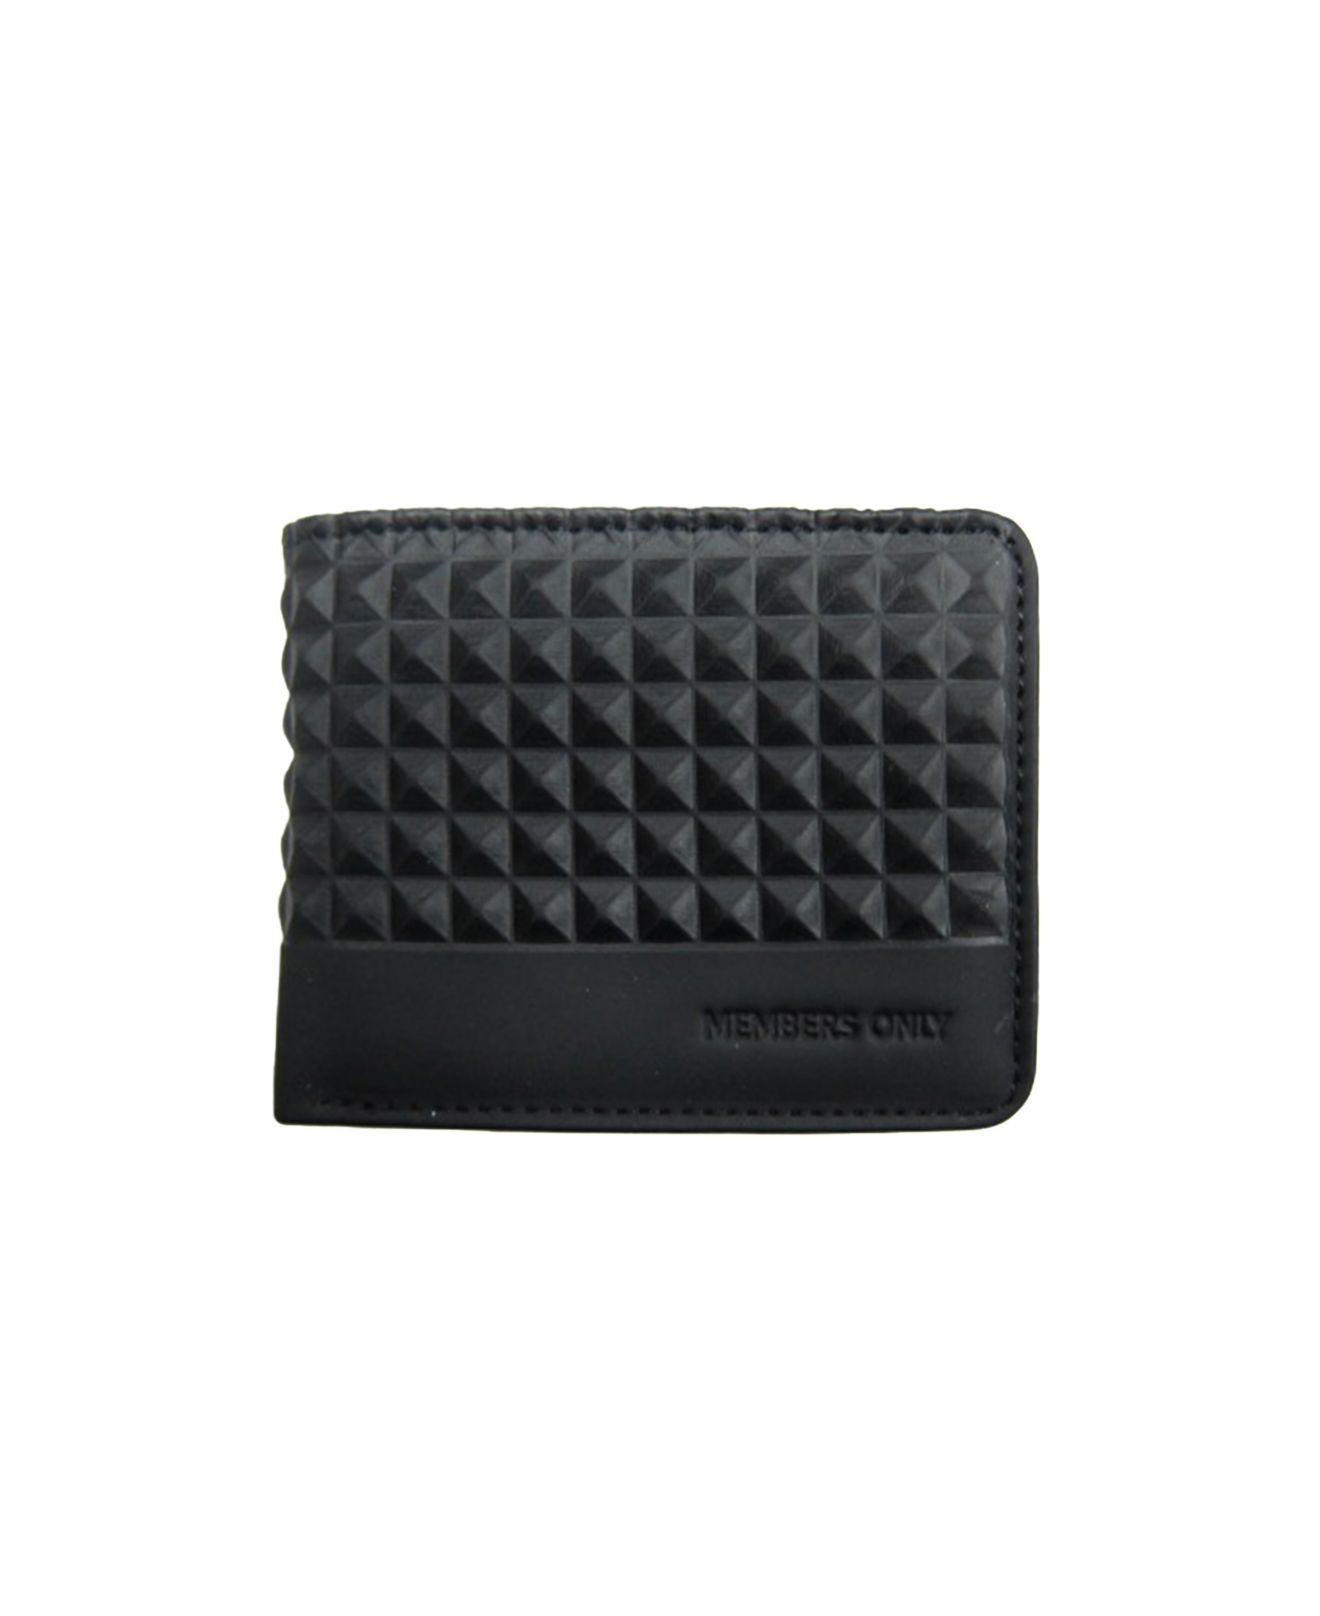 Members Only Rubber Studded Wallet in Black for Men